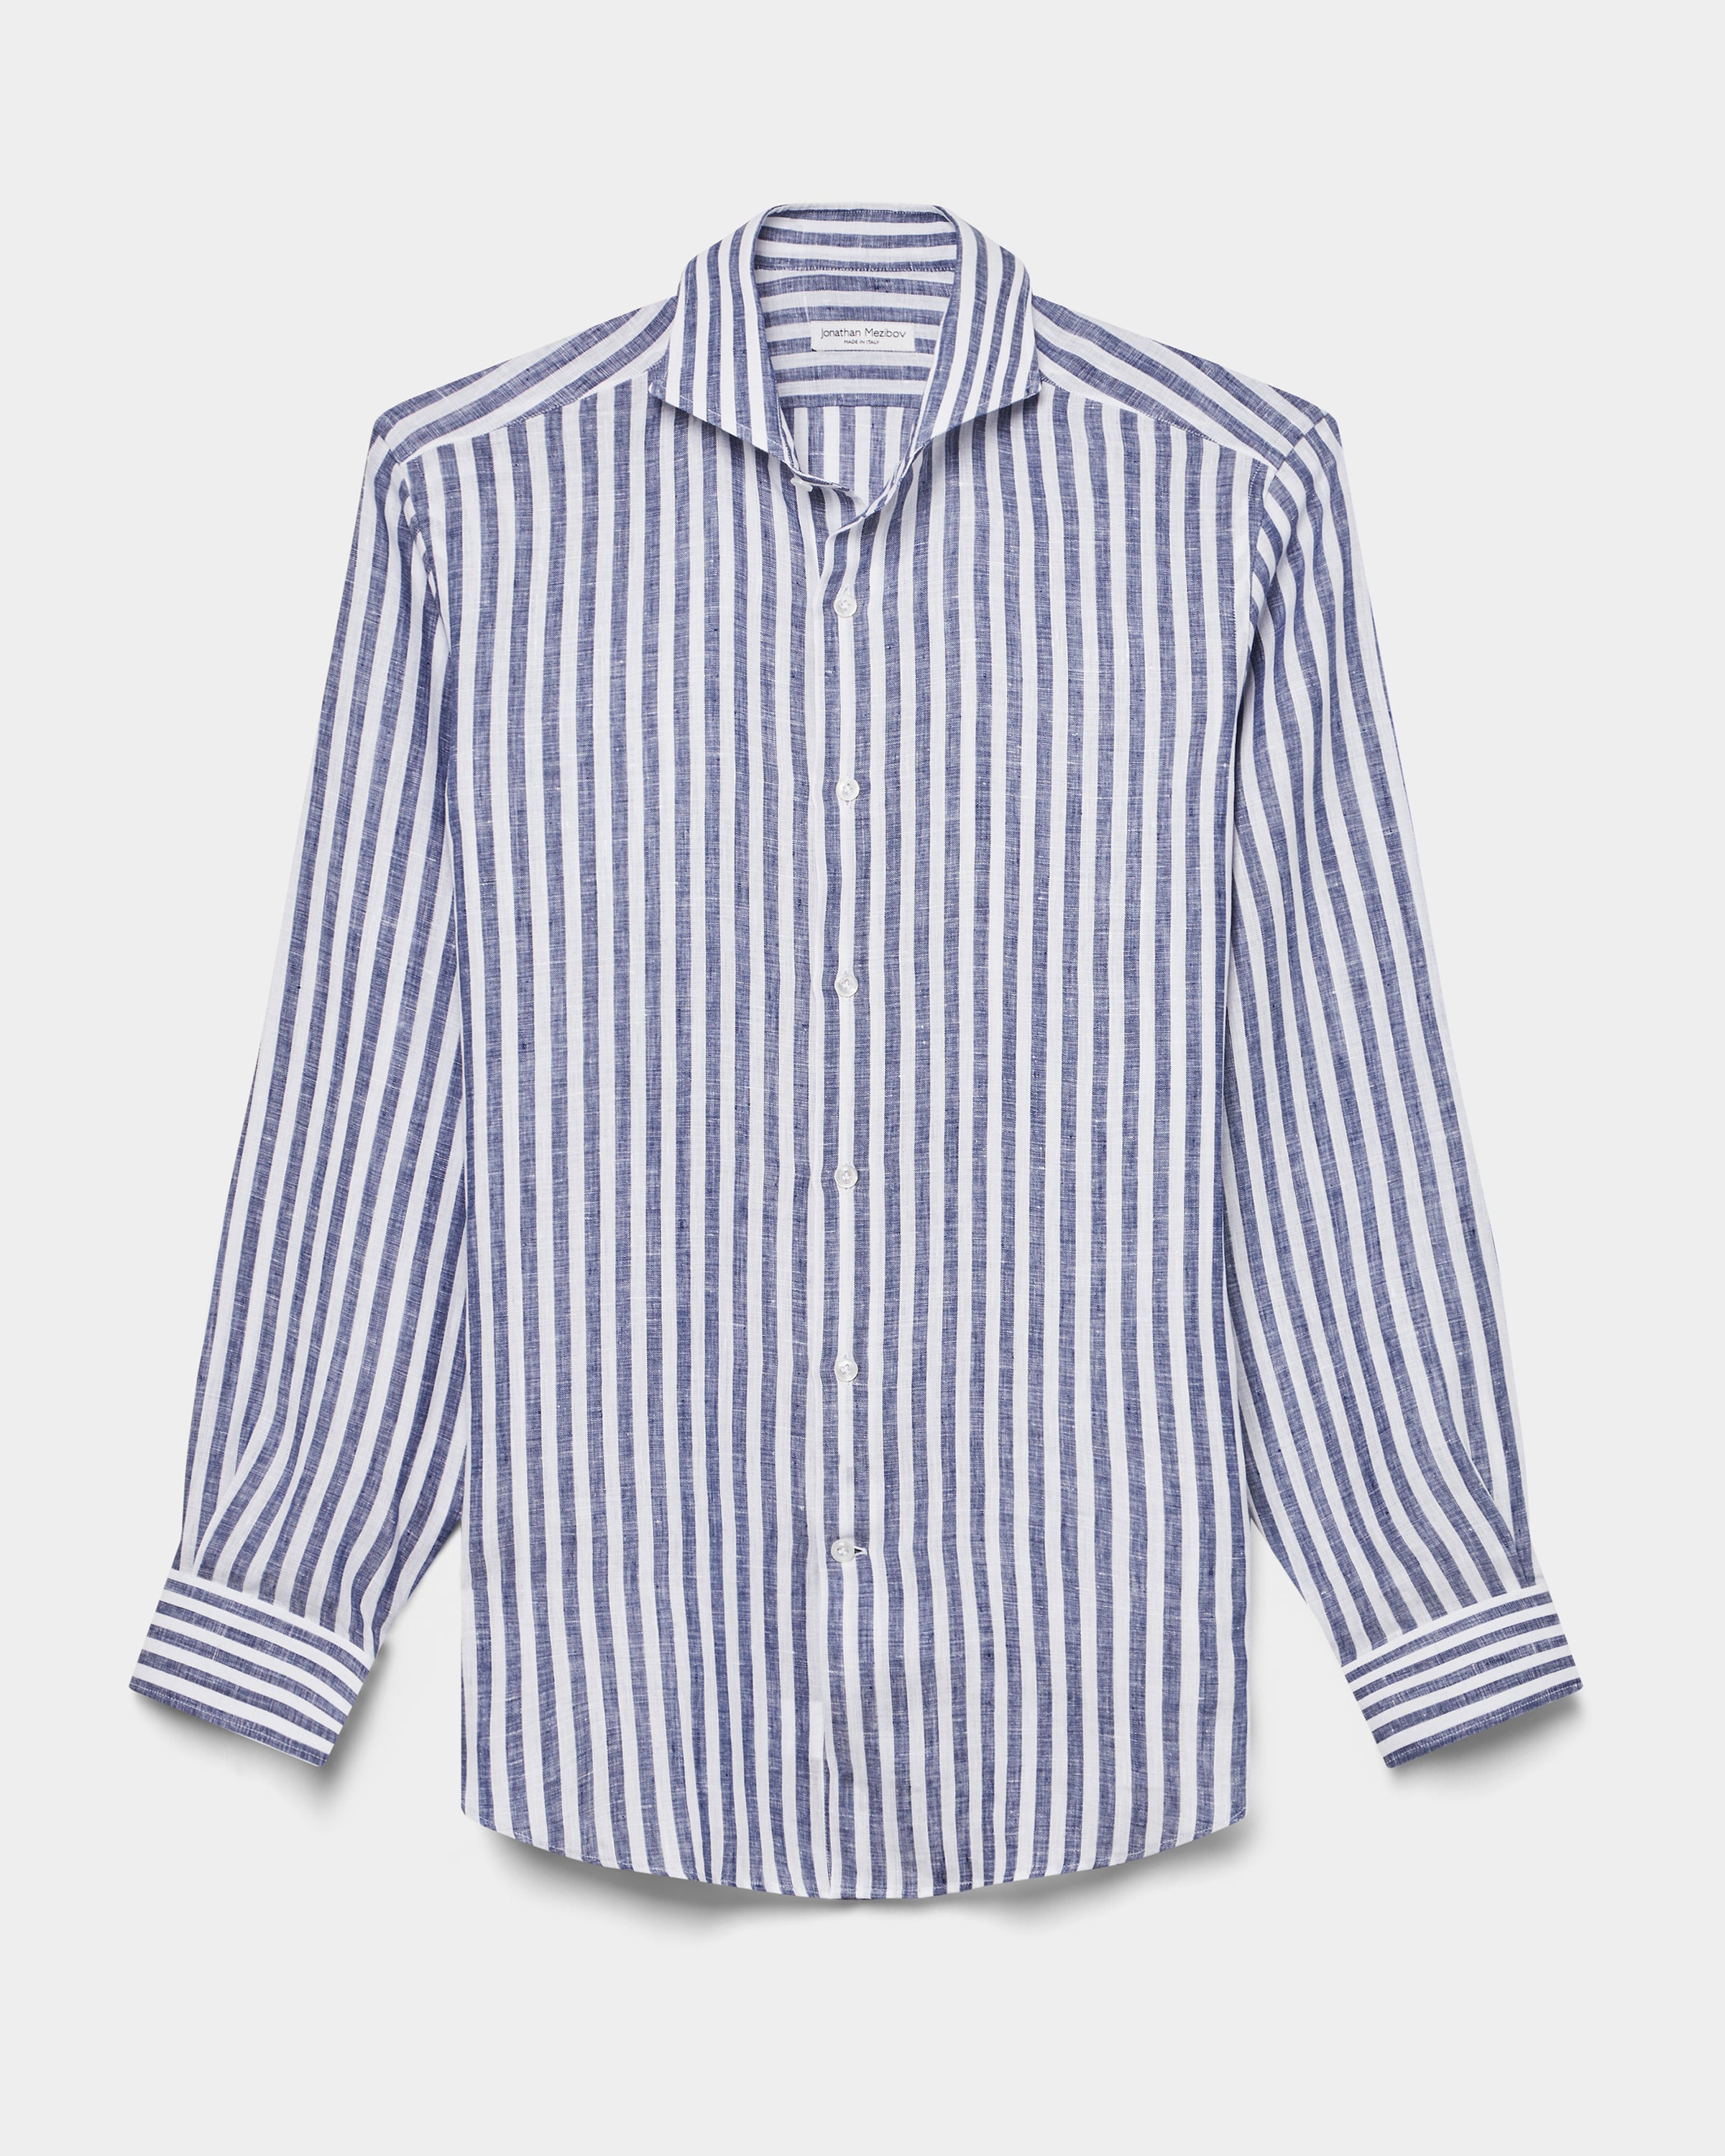 Pearson Linen Shirt - Made to Order